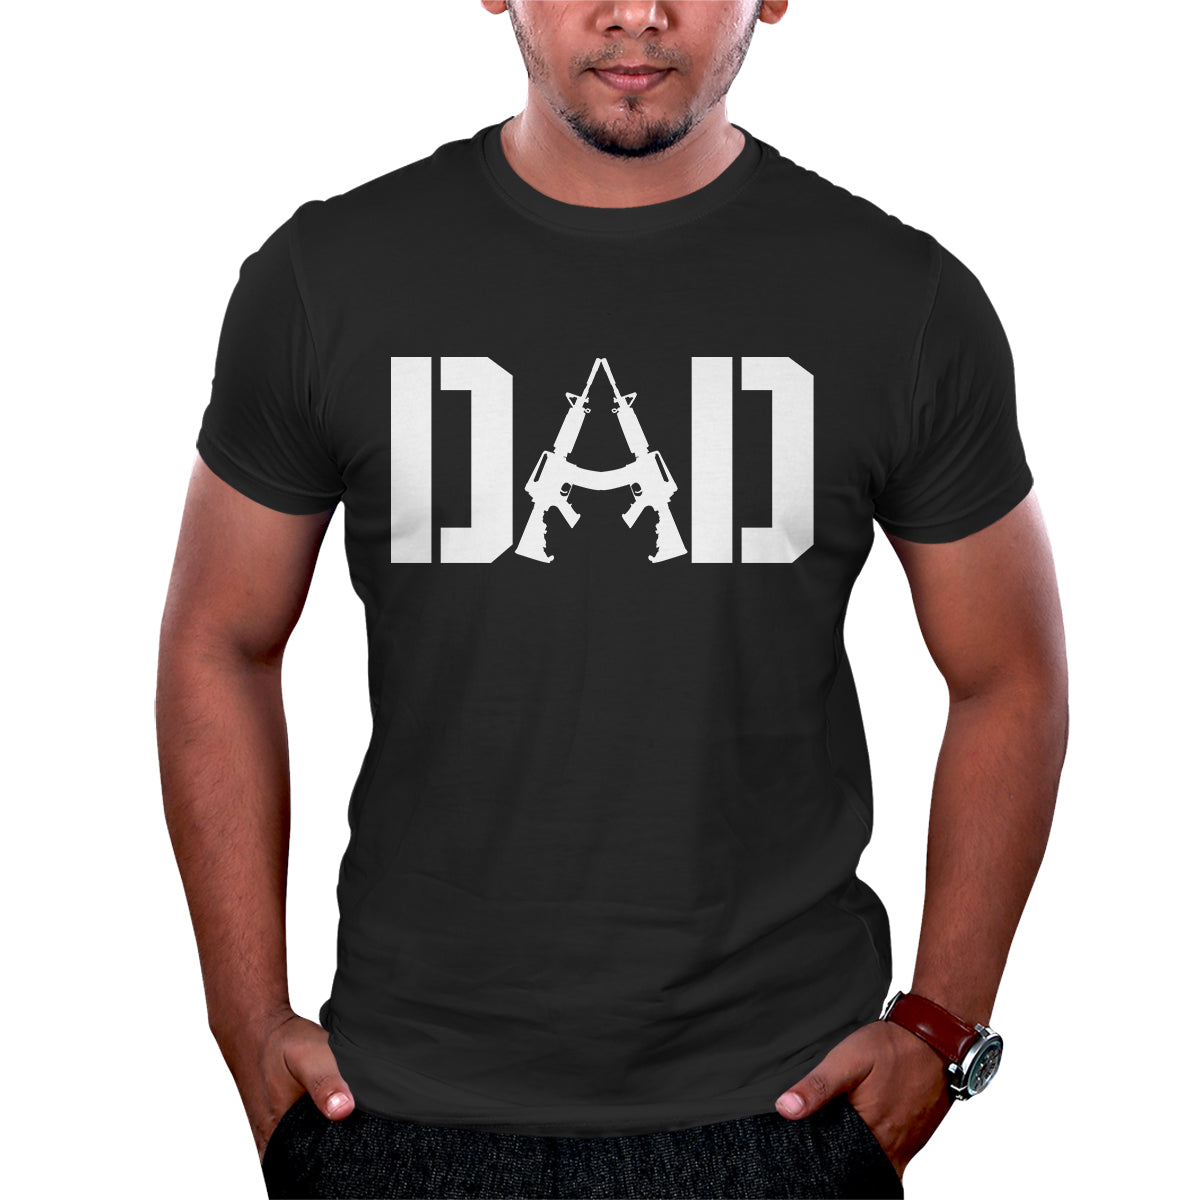 2A Dad T-Shirt Small